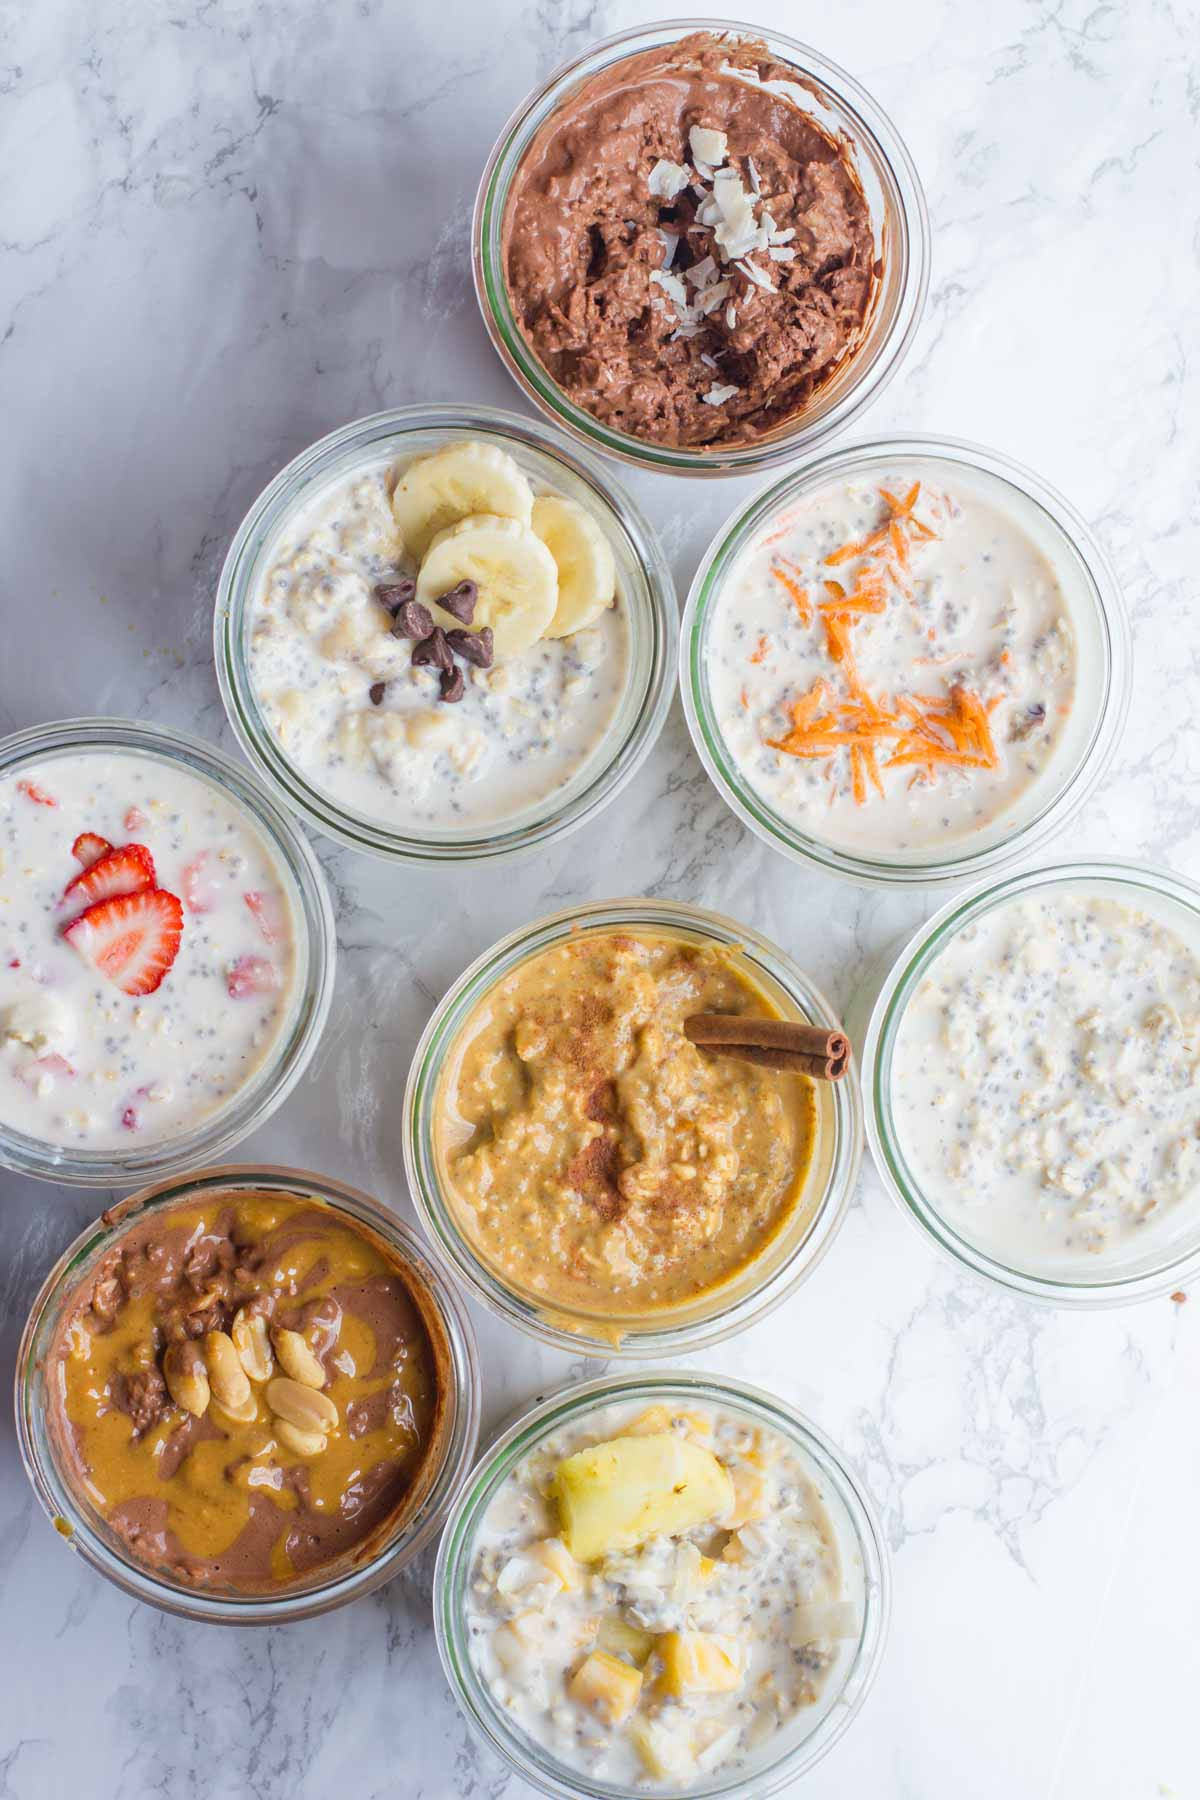 Overnight Oats Recipe Healthy
 8 Classic Overnight Oats Recipes You Should Try Wholefully